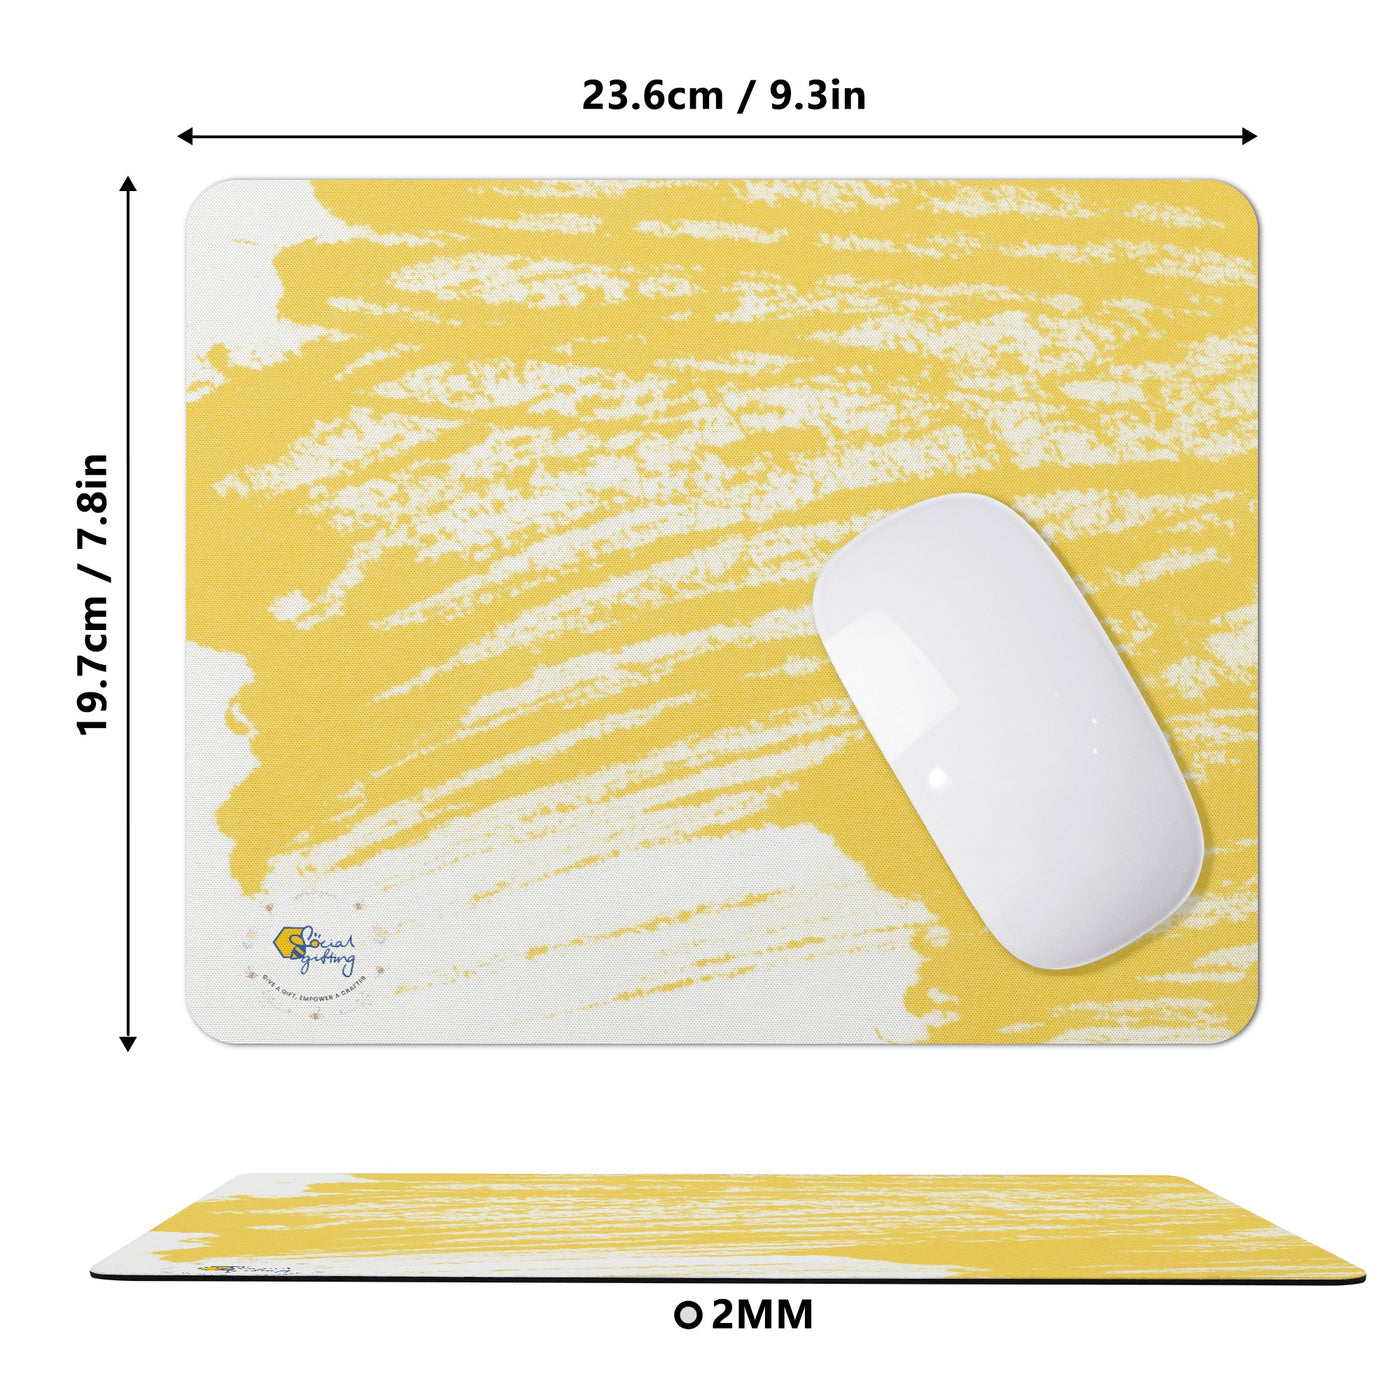 Customized Mouse Pads (45 days pre-order)